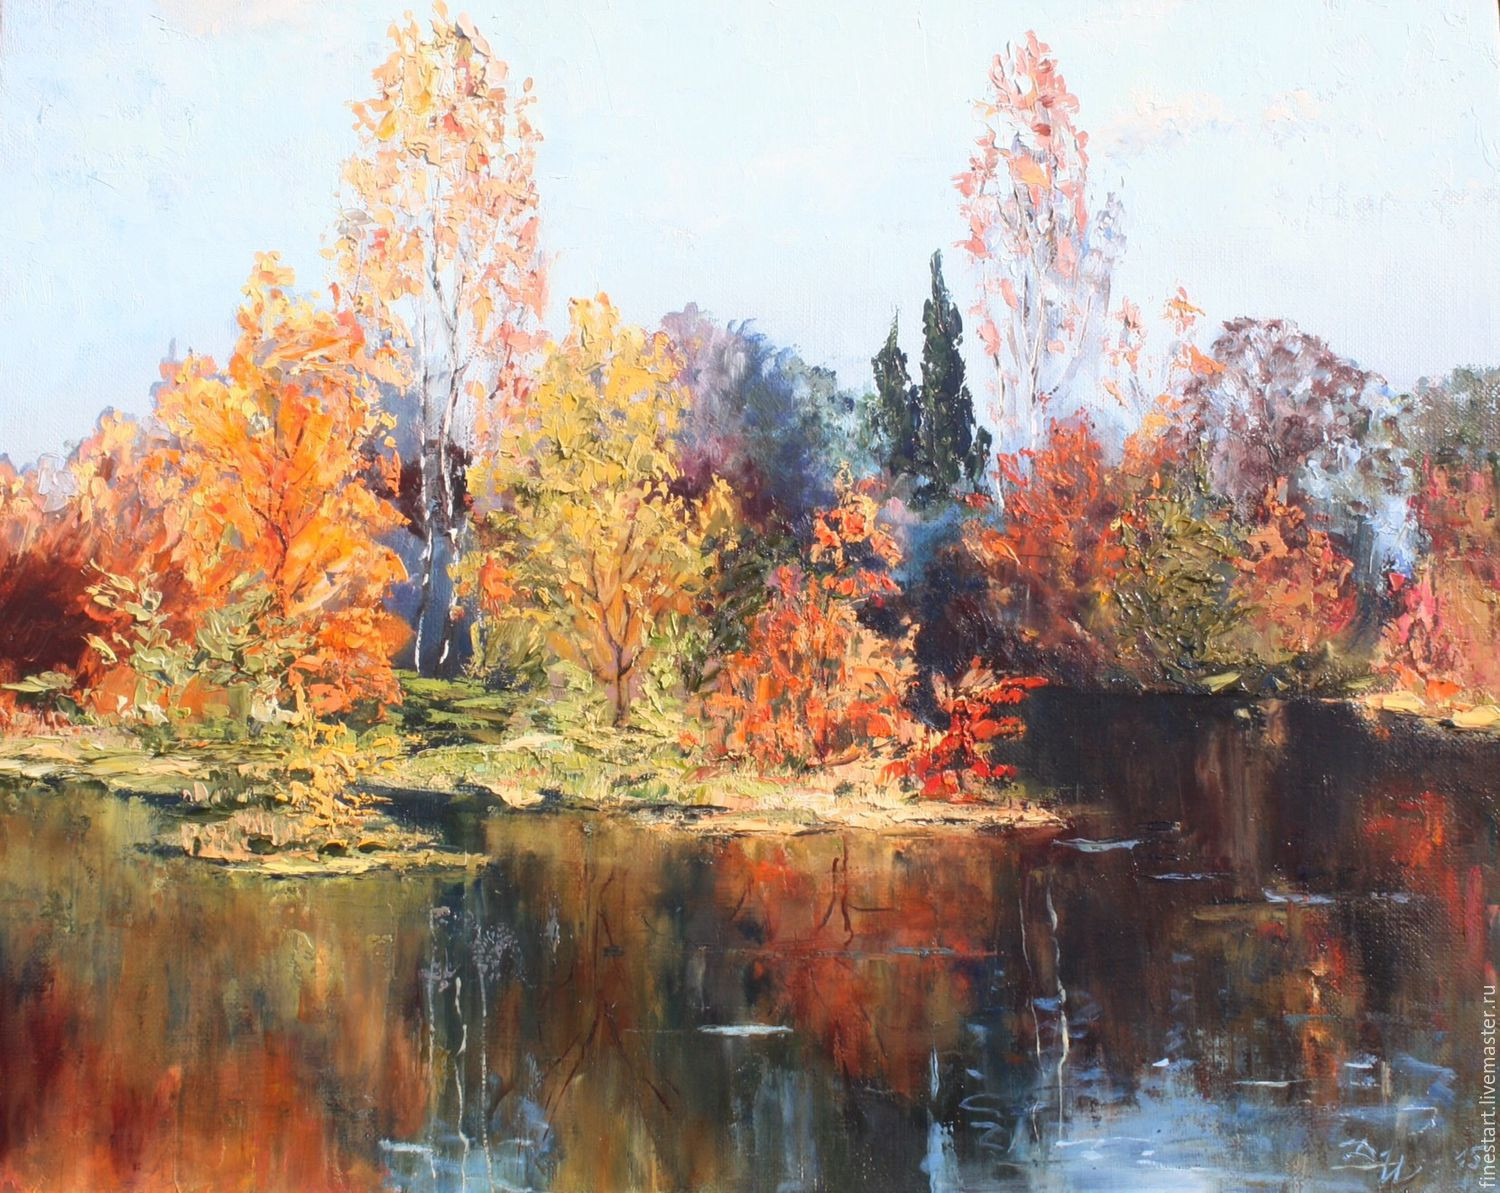 Oil Painting Landscape
 Oil painting landscape Autumn Oil on Canvas Impressionism